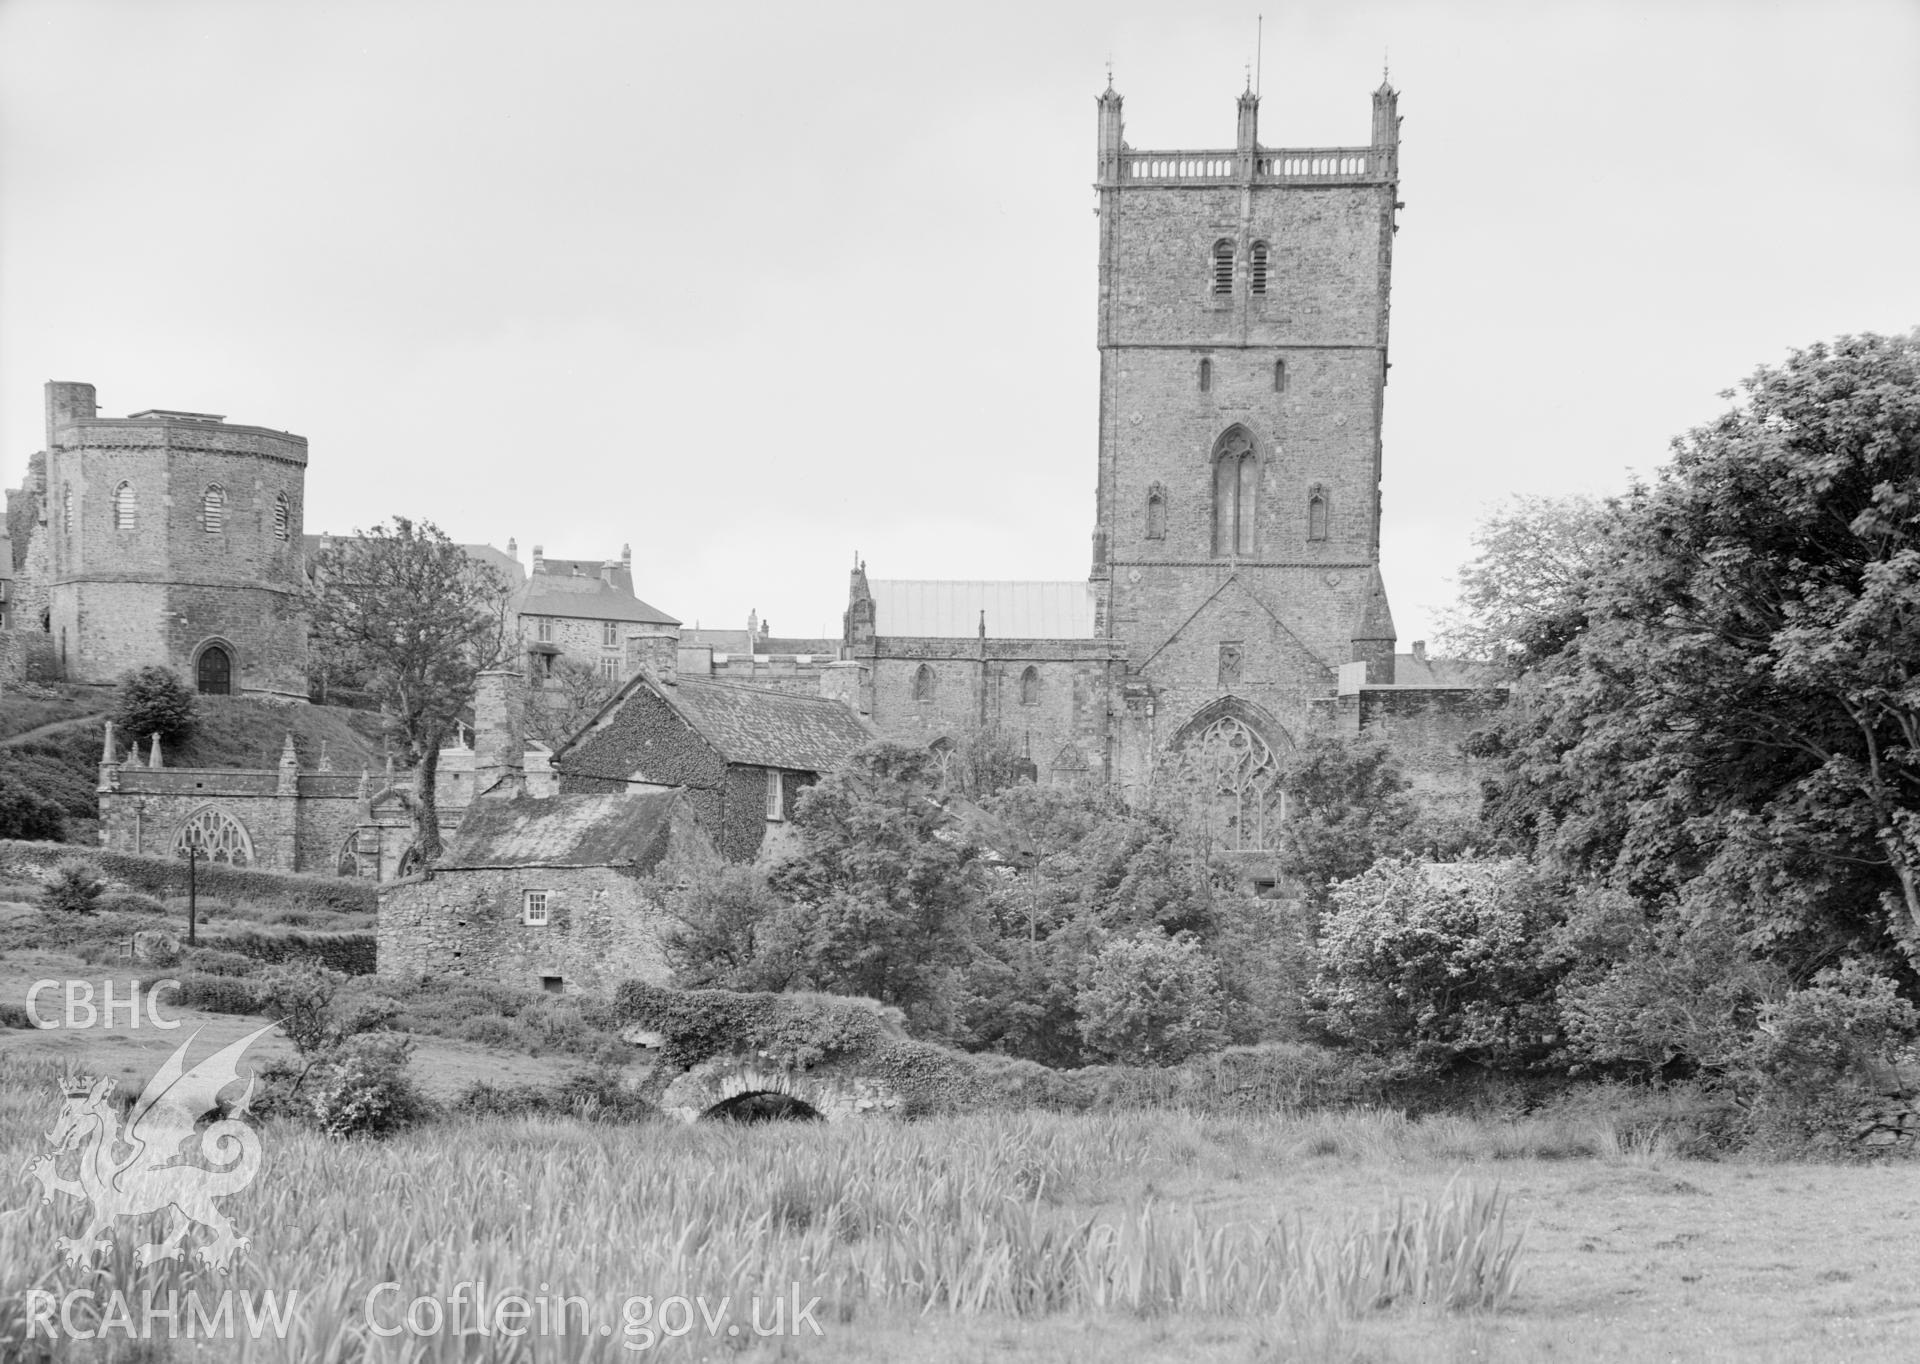 Digital copy of a black and white acetate negative showing general view of St. David's Cathedral, taken by E.W. Lovegrove, July 1936.